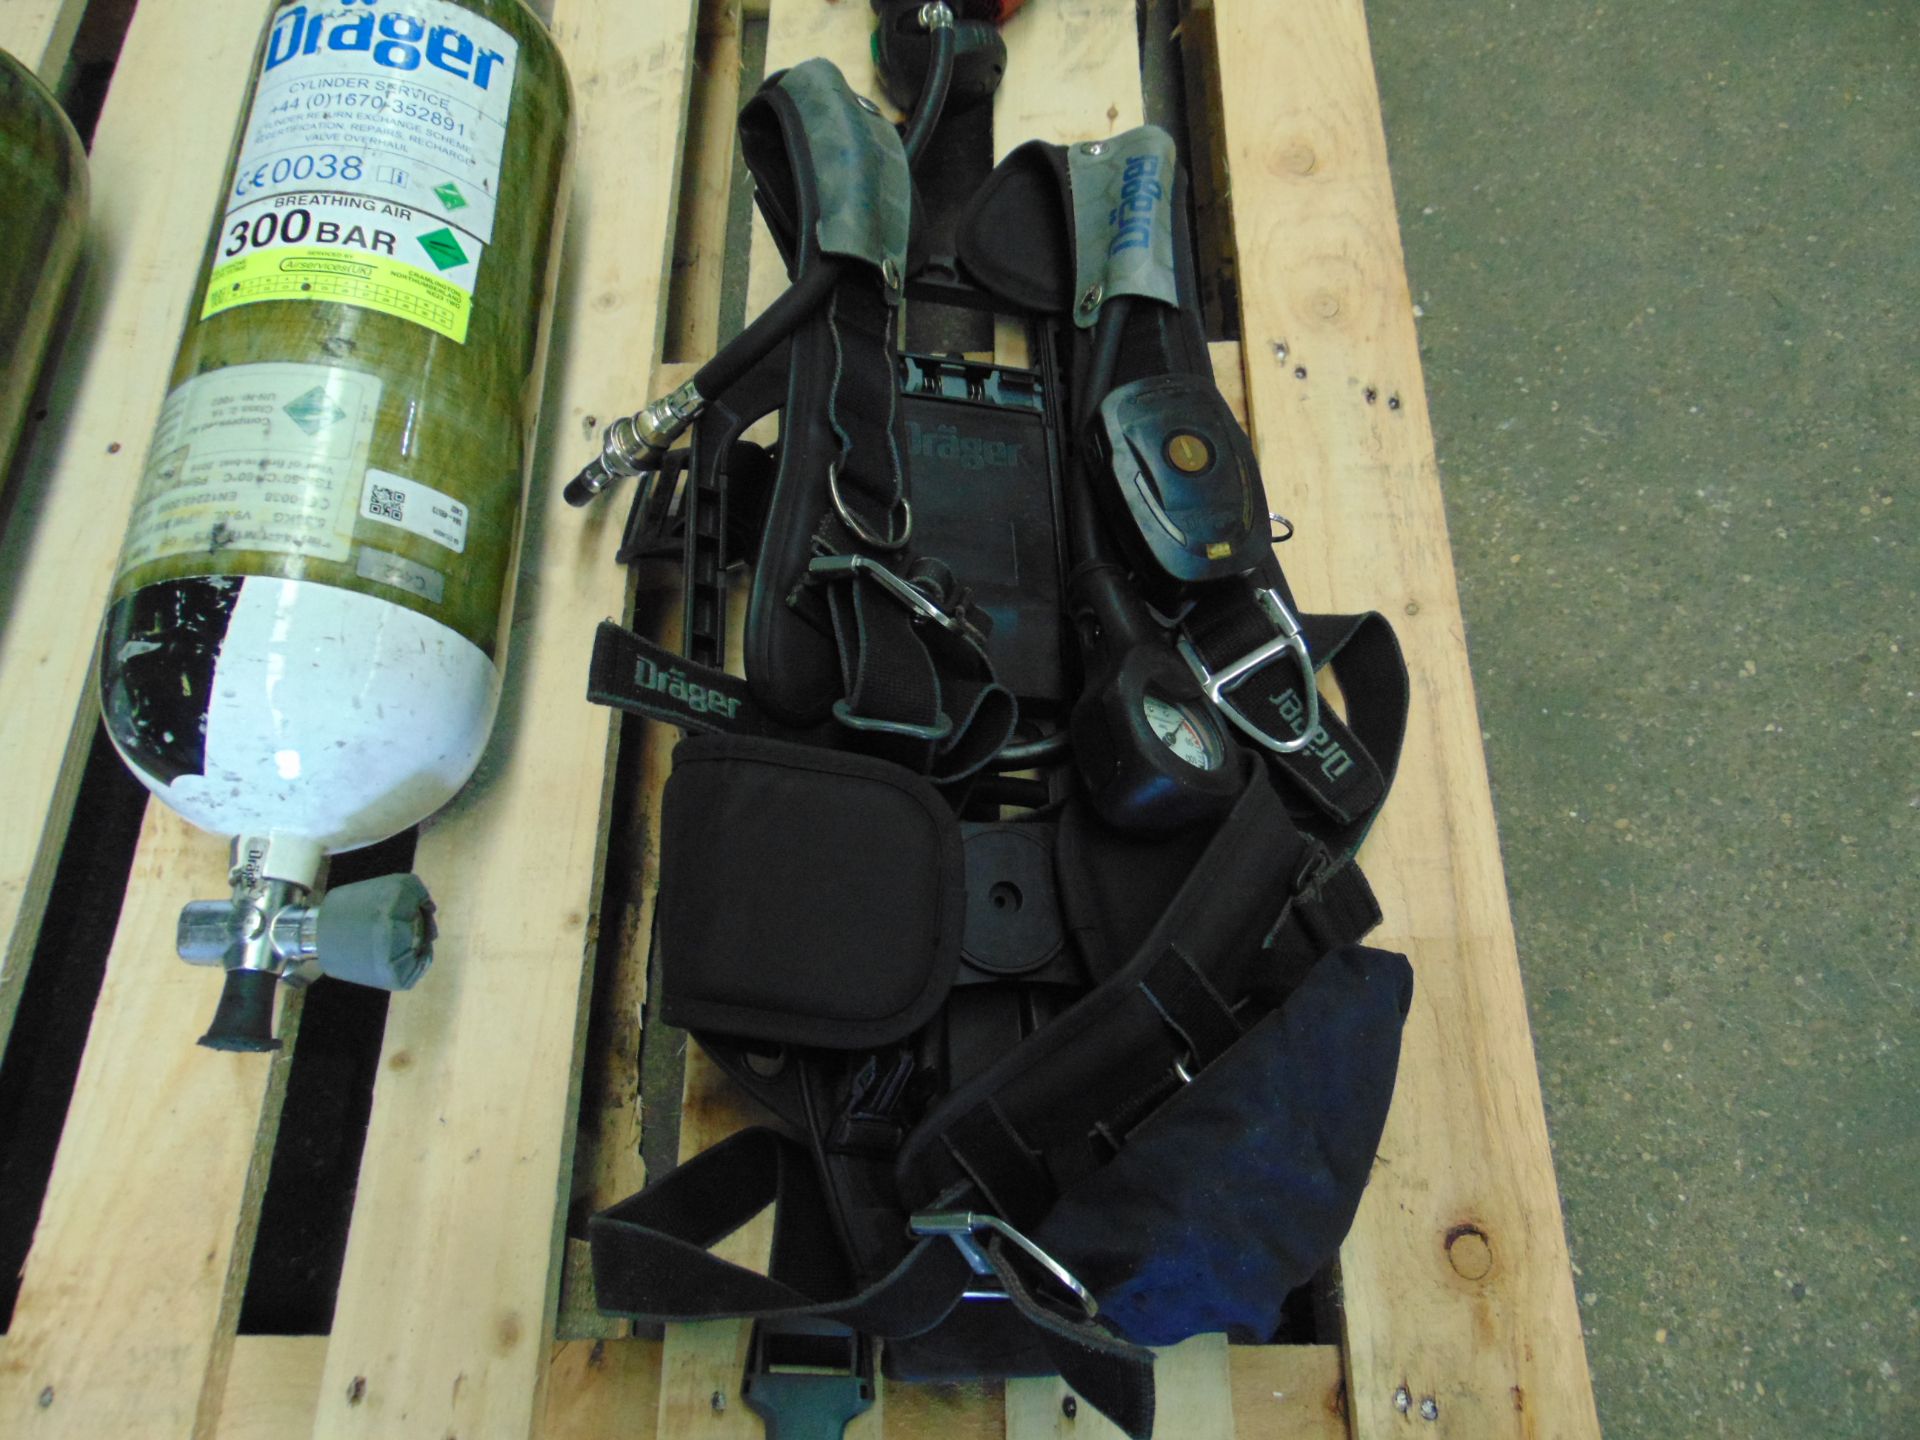 Drager PSS 7000 Self Contained Breathing Apparatus w/ 2 x Drager 300 Bar Air Cylinders - Image 13 of 17